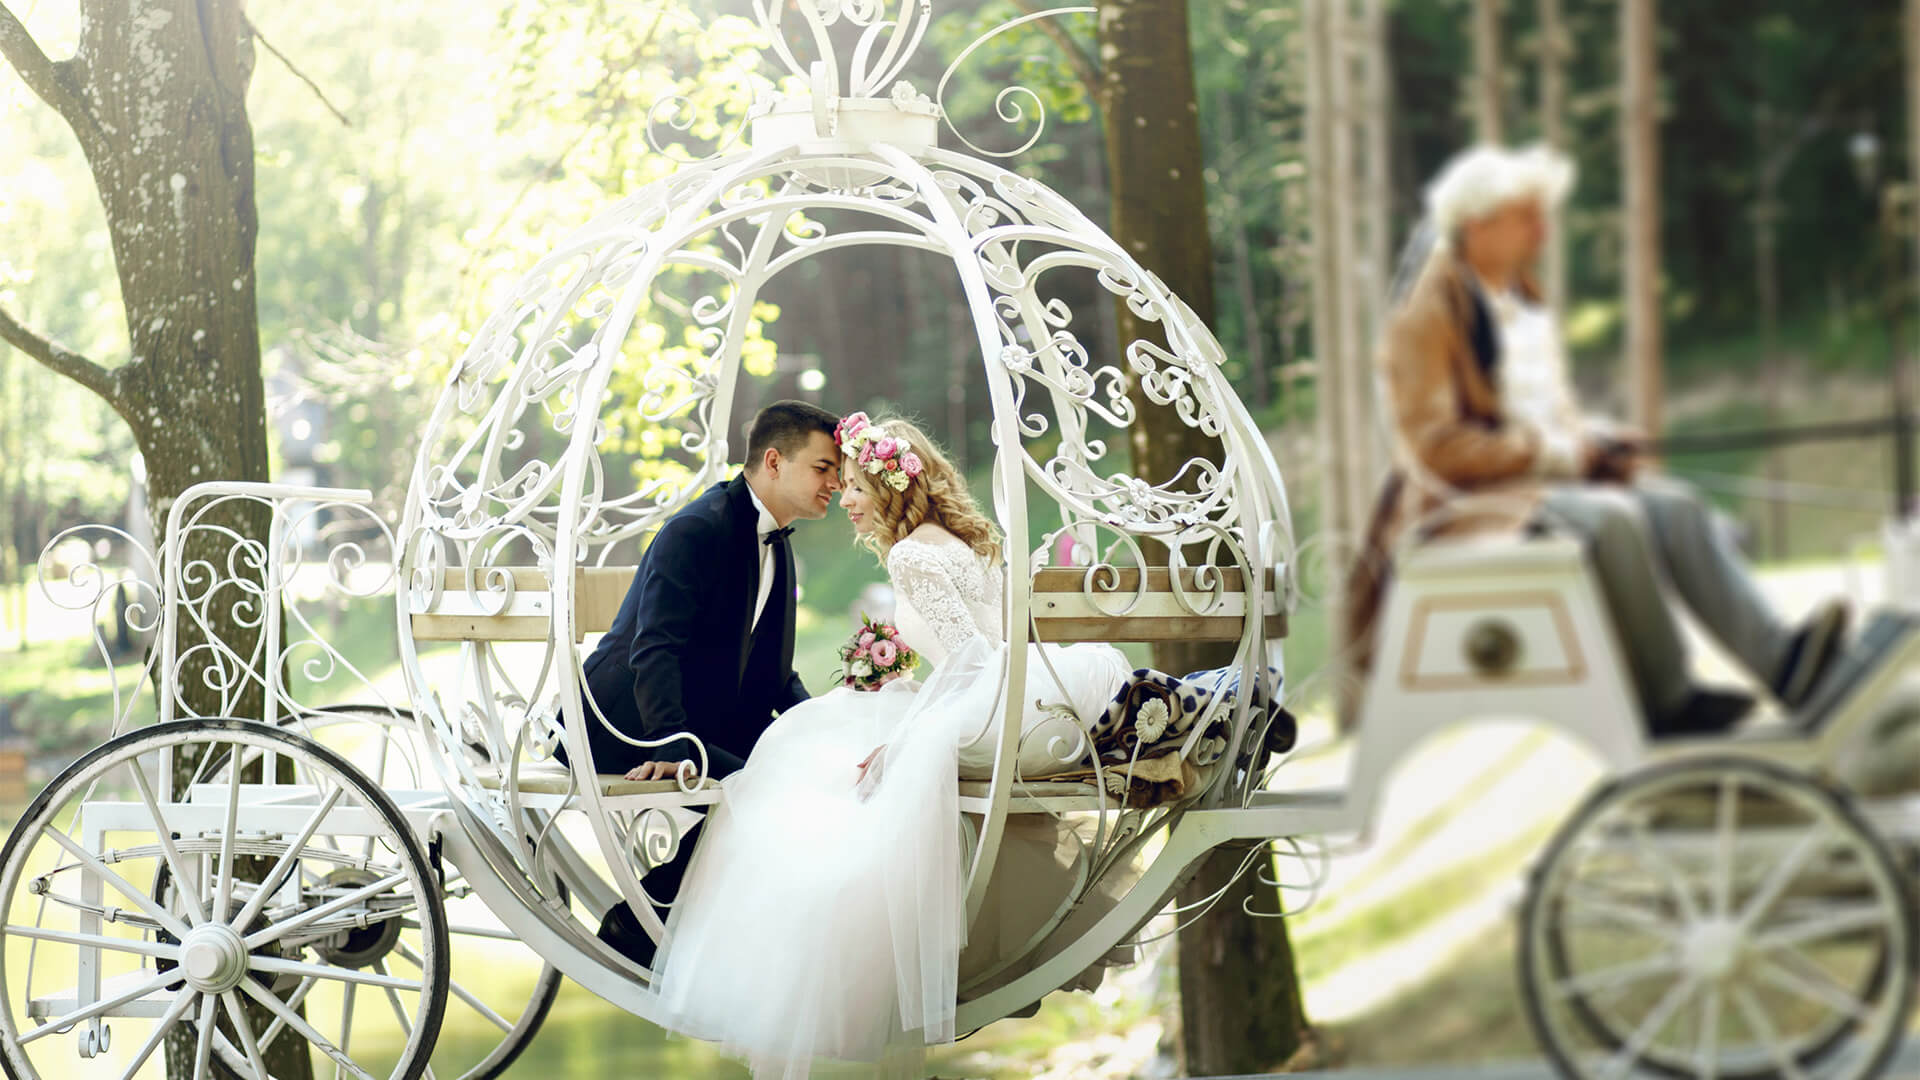 bride and groom sitting in a fairytale looking carriage